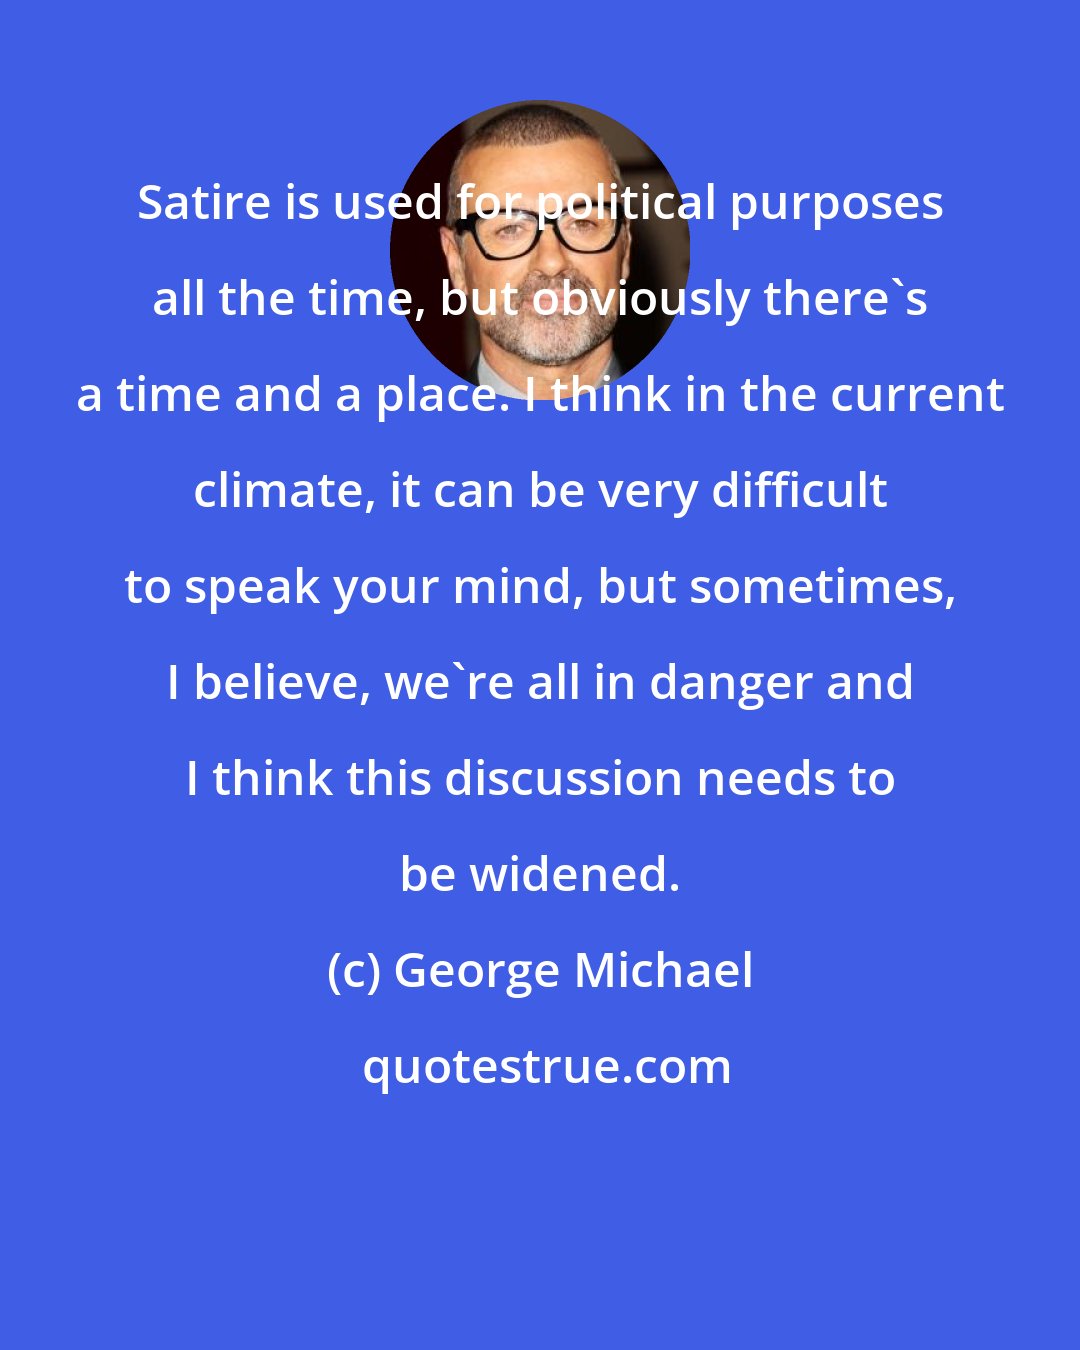 George Michael: Satire is used for political purposes all the time, but obviously there's a time and a place. I think in the current climate, it can be very difficult to speak your mind, but sometimes, I believe, we're all in danger and I think this discussion needs to be widened.